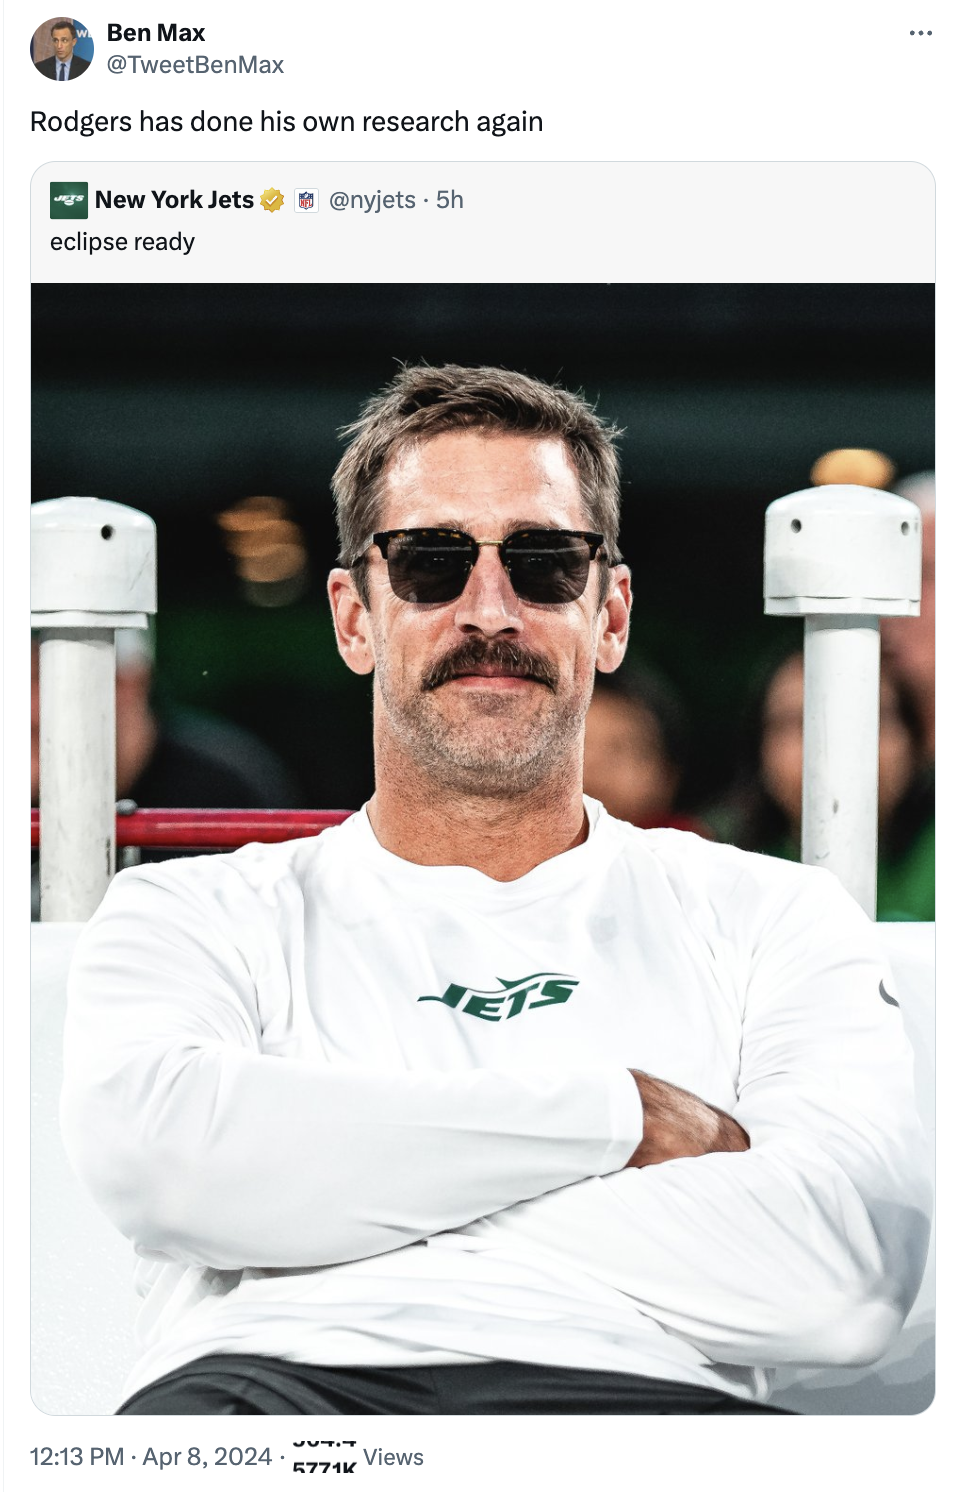 photo caption - Ben Max Rodgers has done his own research again New York Jets nyjets5h eclipse ready Views